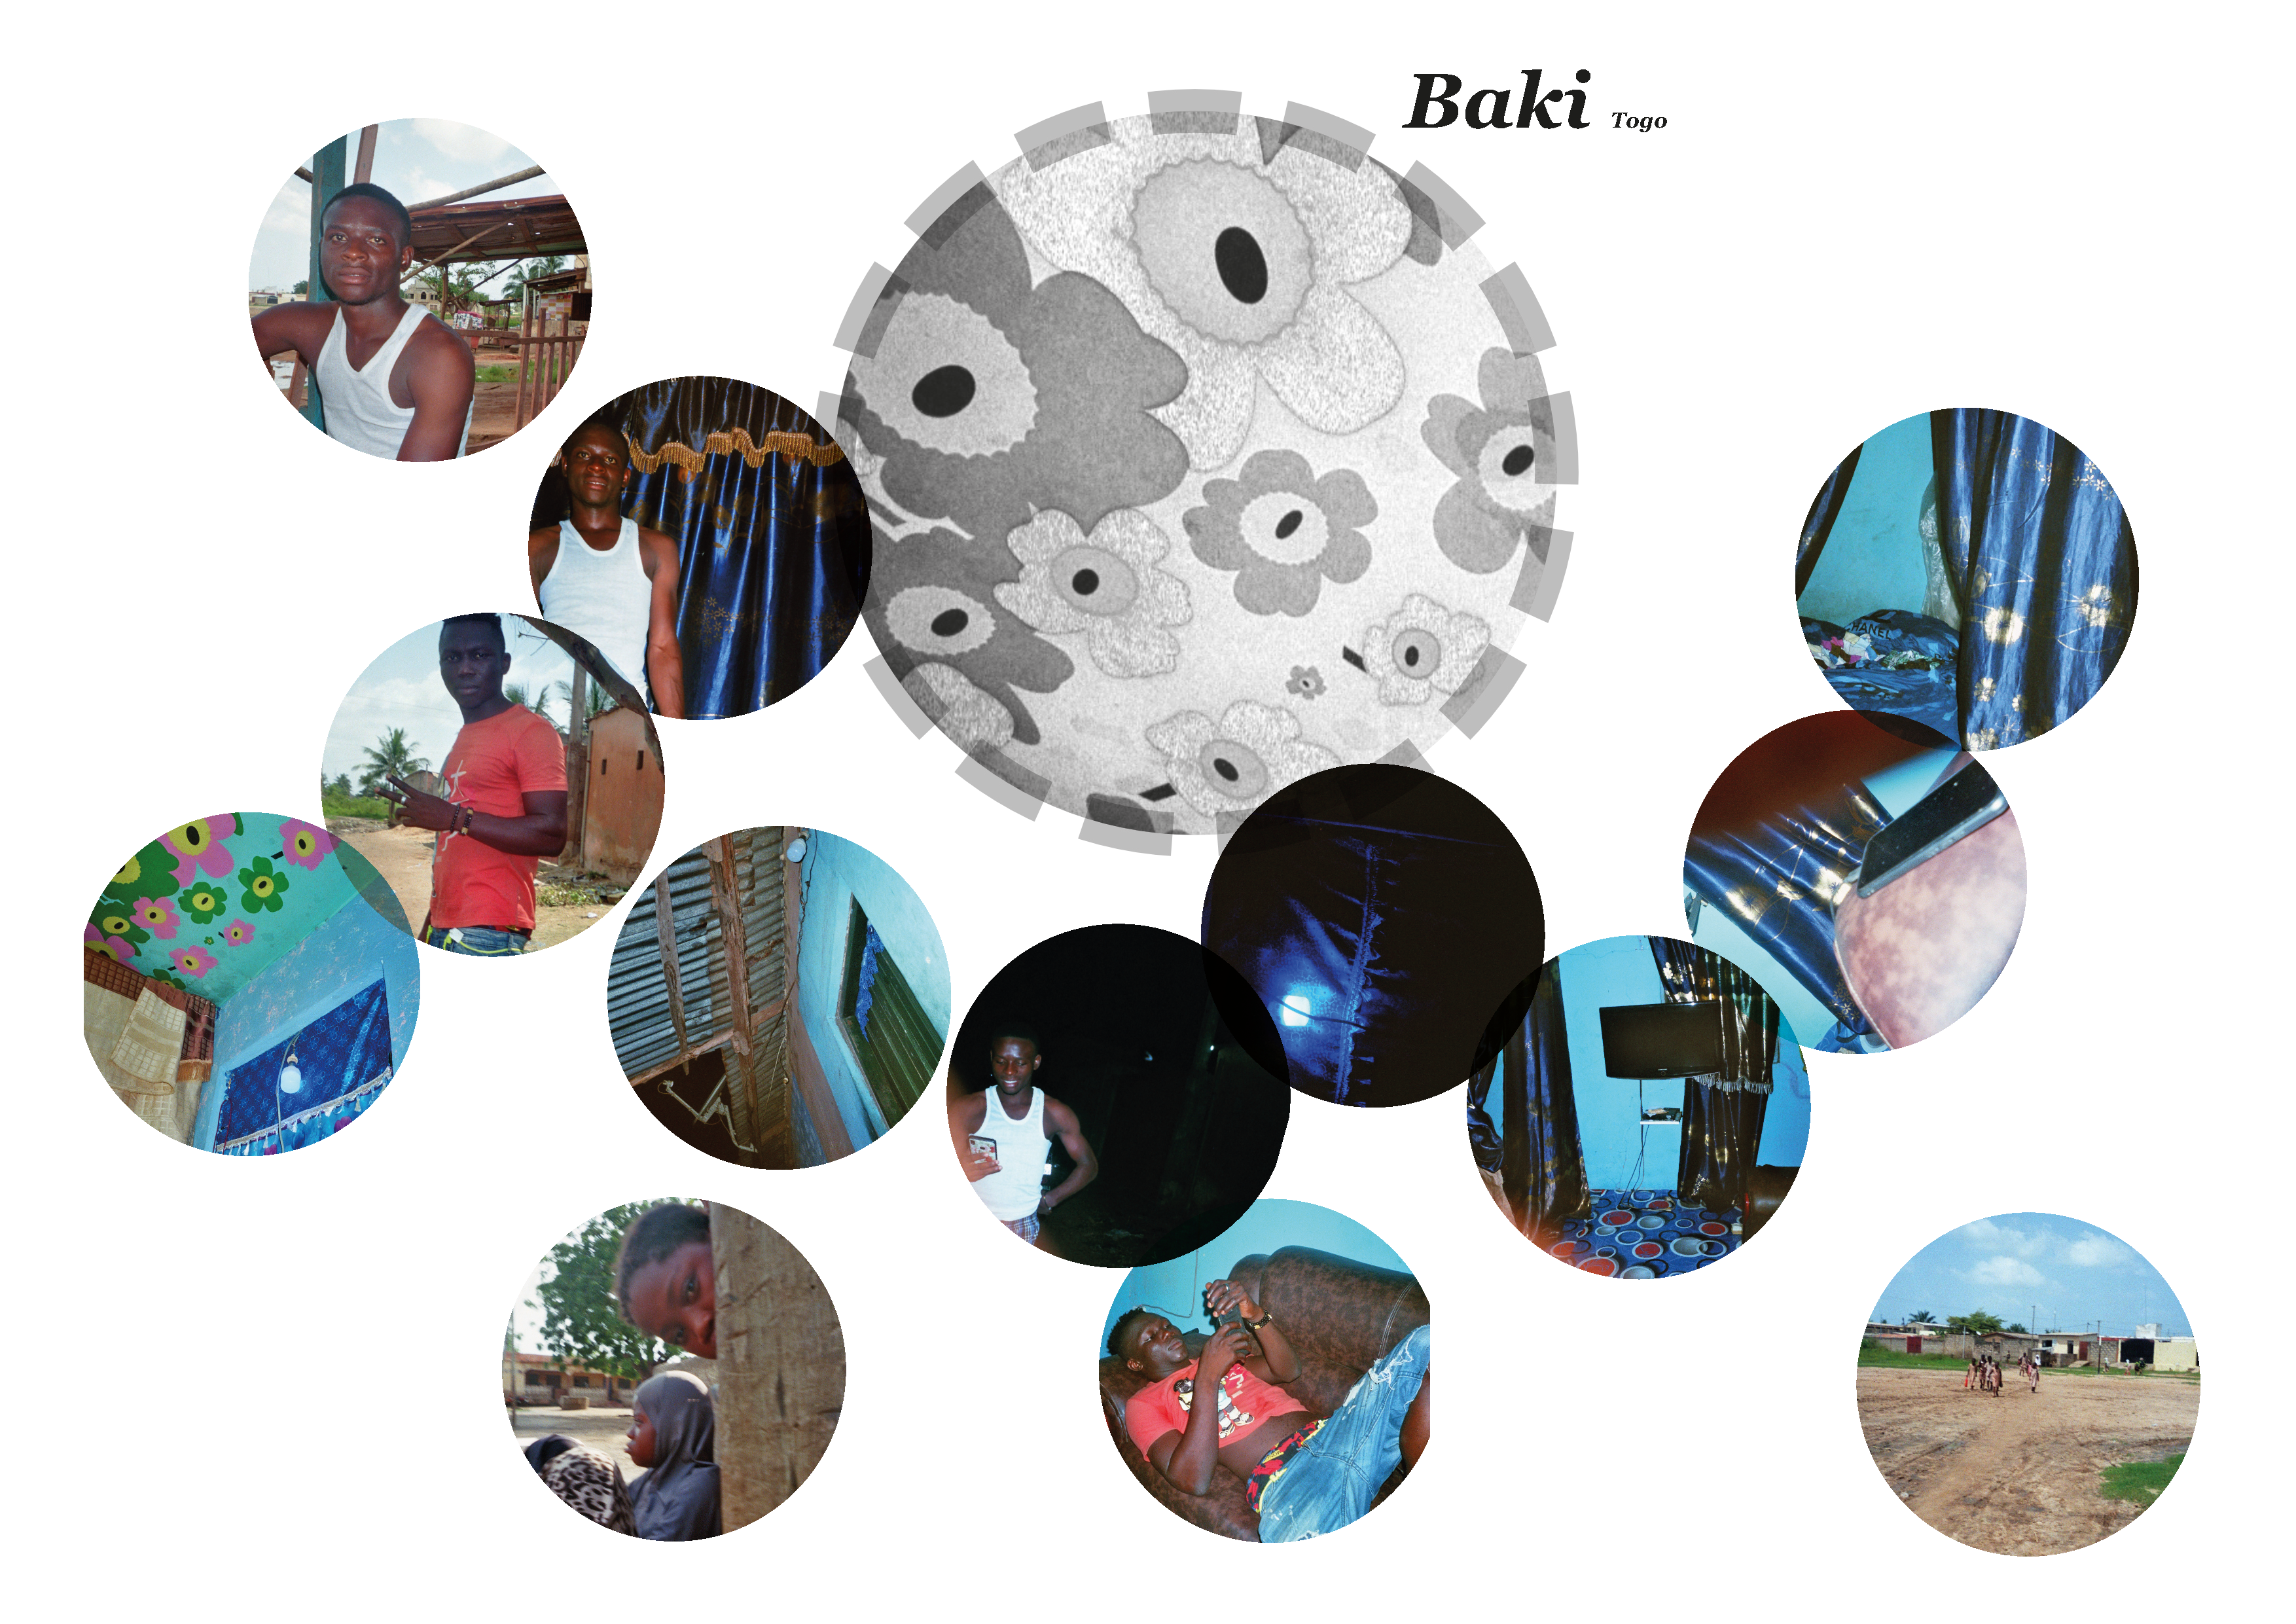 Collage of pictures of religion and peace by Baki in Togo